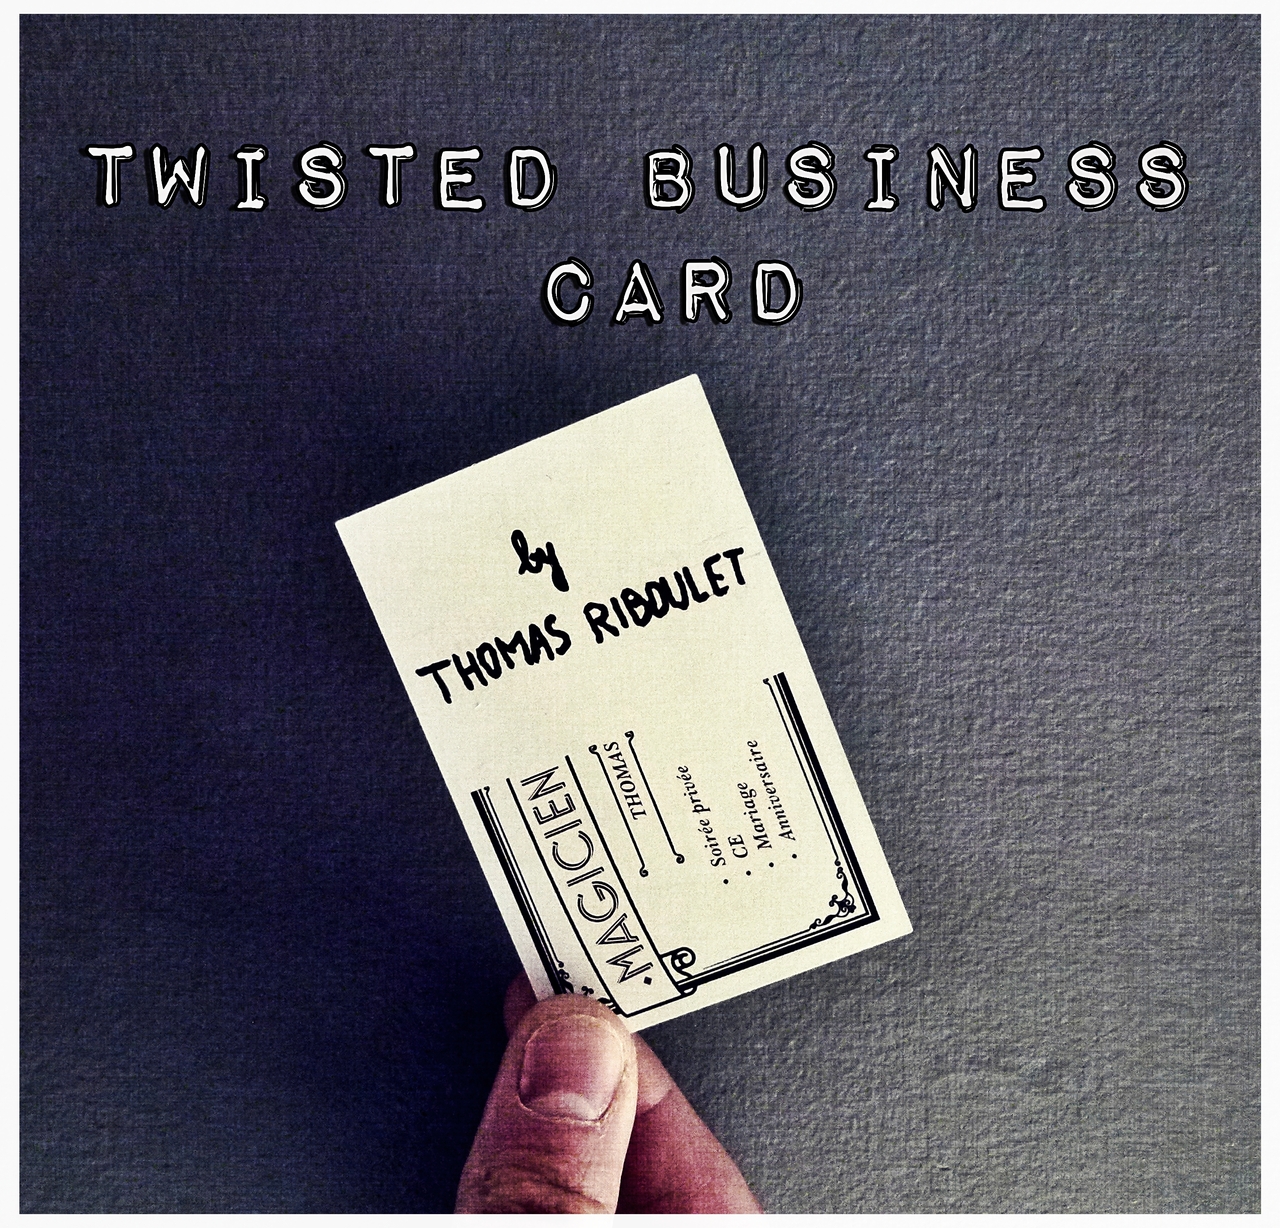 Thomas Riboulet - Twisted Business Card